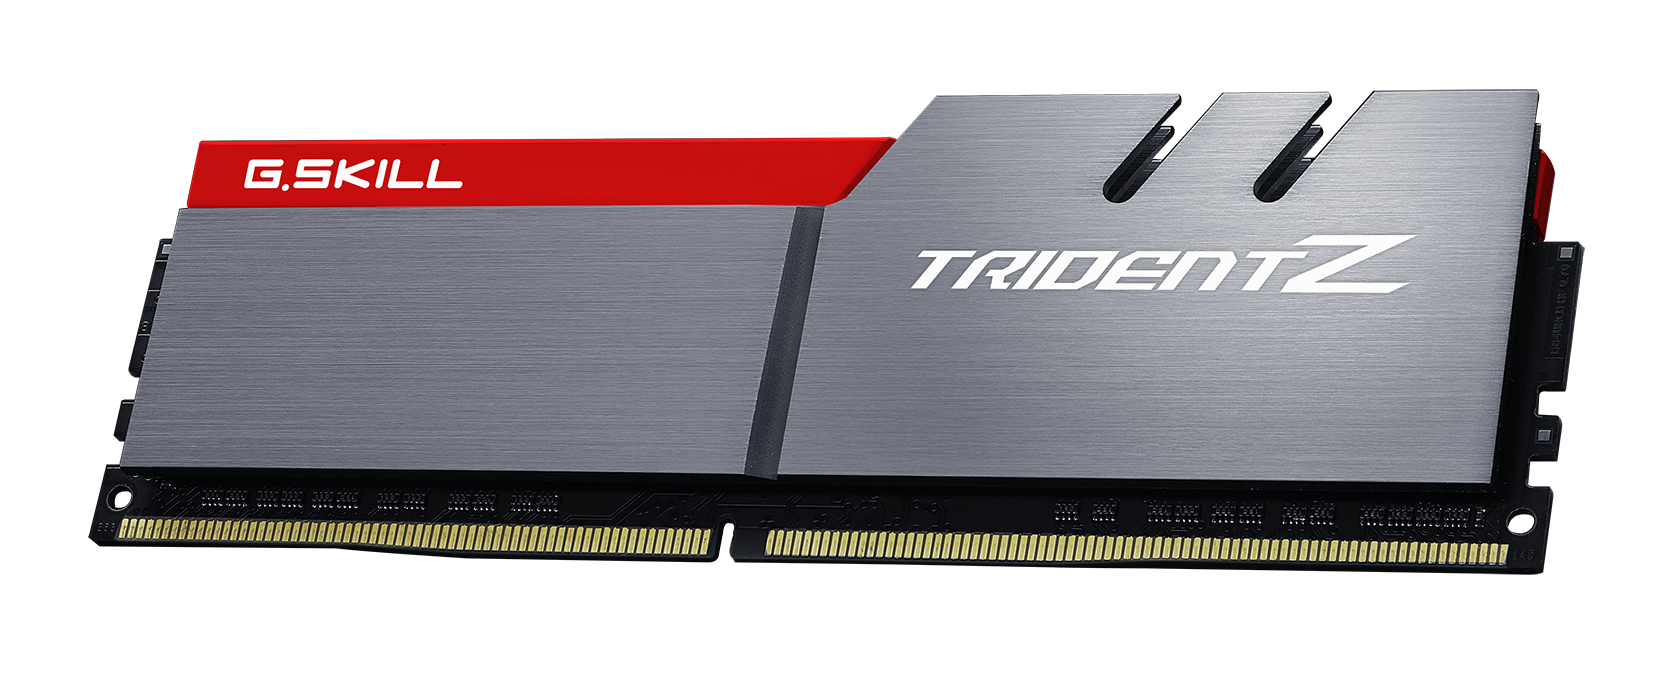 Media asset in full size related to 3dfxzone.it news item entitled as follows: G.SKILL annuncia il kit di memoria Trident Z DDR4 3600MHz CL17 64GB | Image Name: news25208_G-SKILL-DDR4-3600-KIT-64GB_1.png